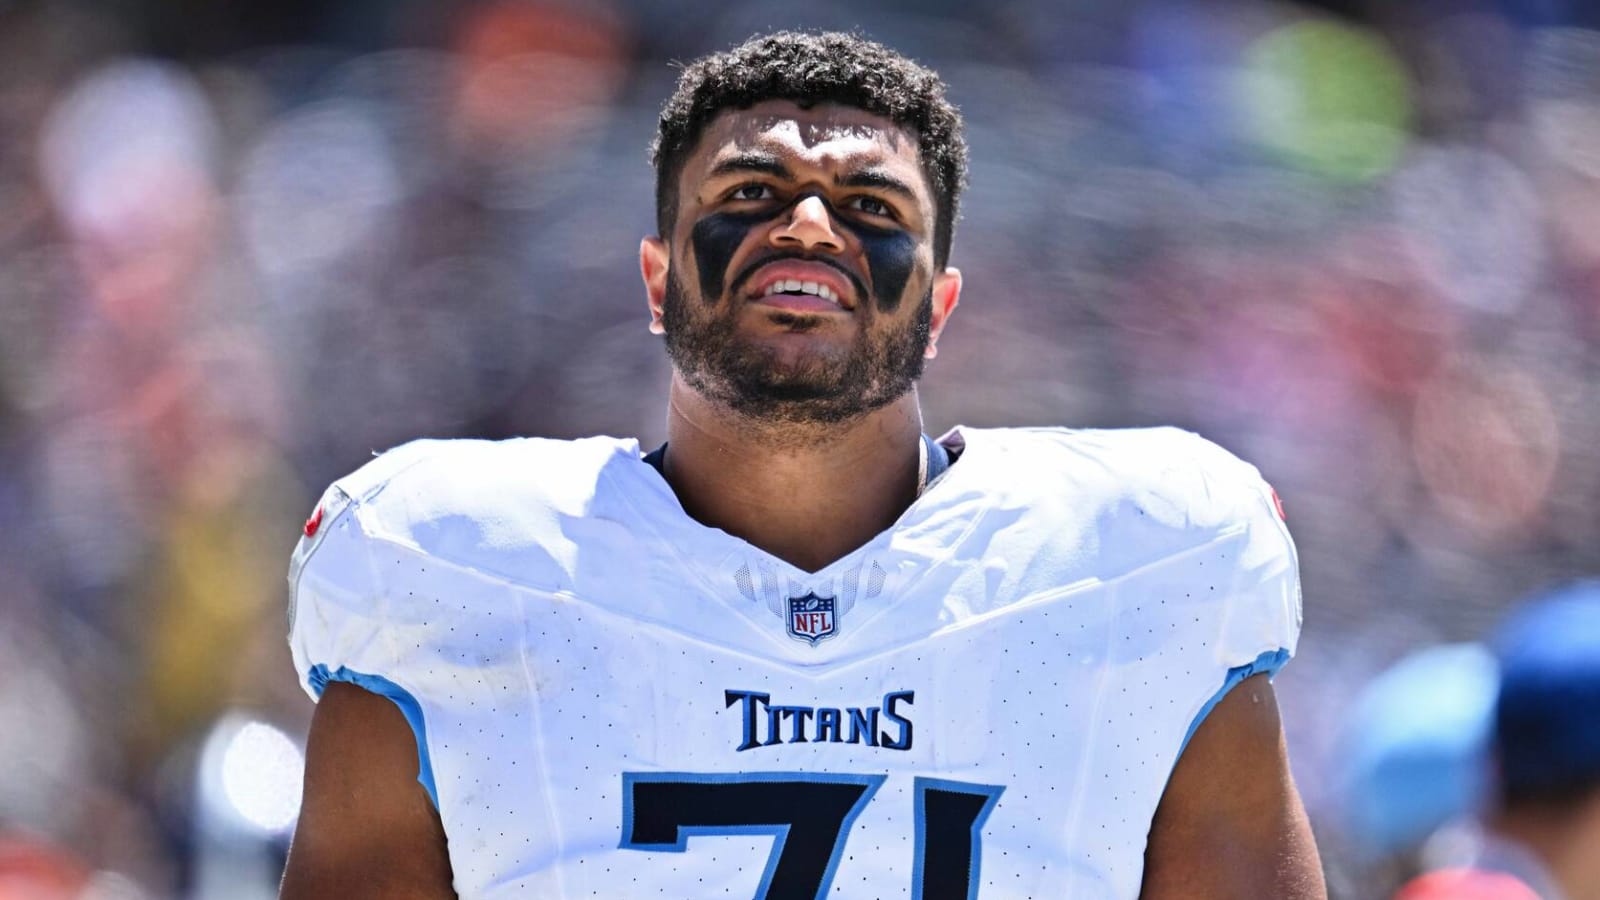 Titans part ways with former first-round pick